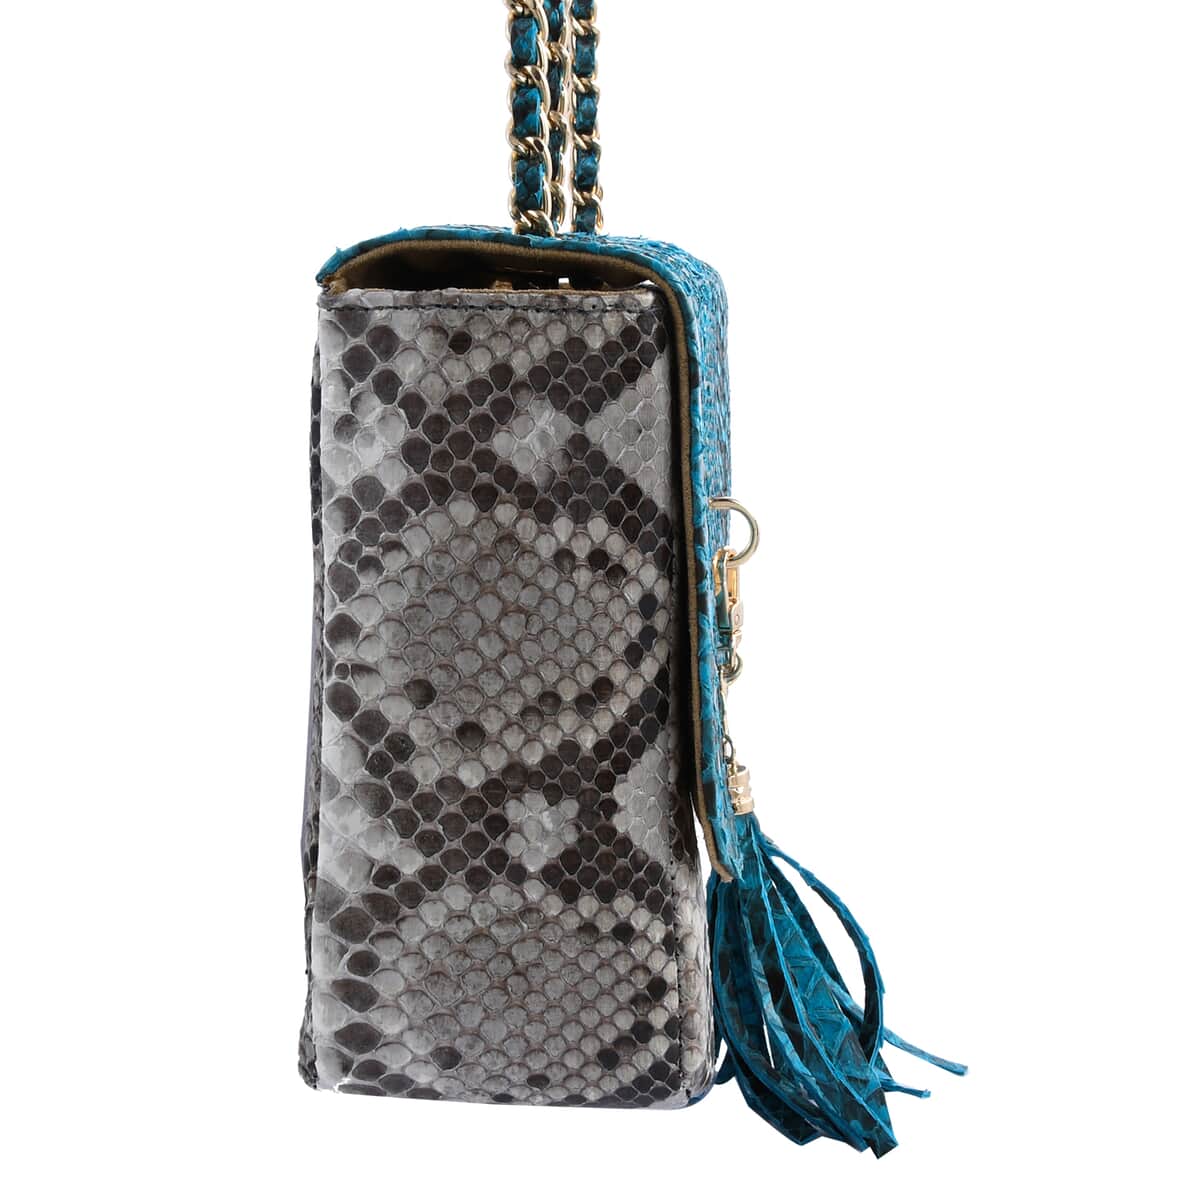 The Grand Pelle Handcrafted Black Color 100 % Genuine Python Leather Crossbody Bag (10.00"x6.75"x3.5") image number 2